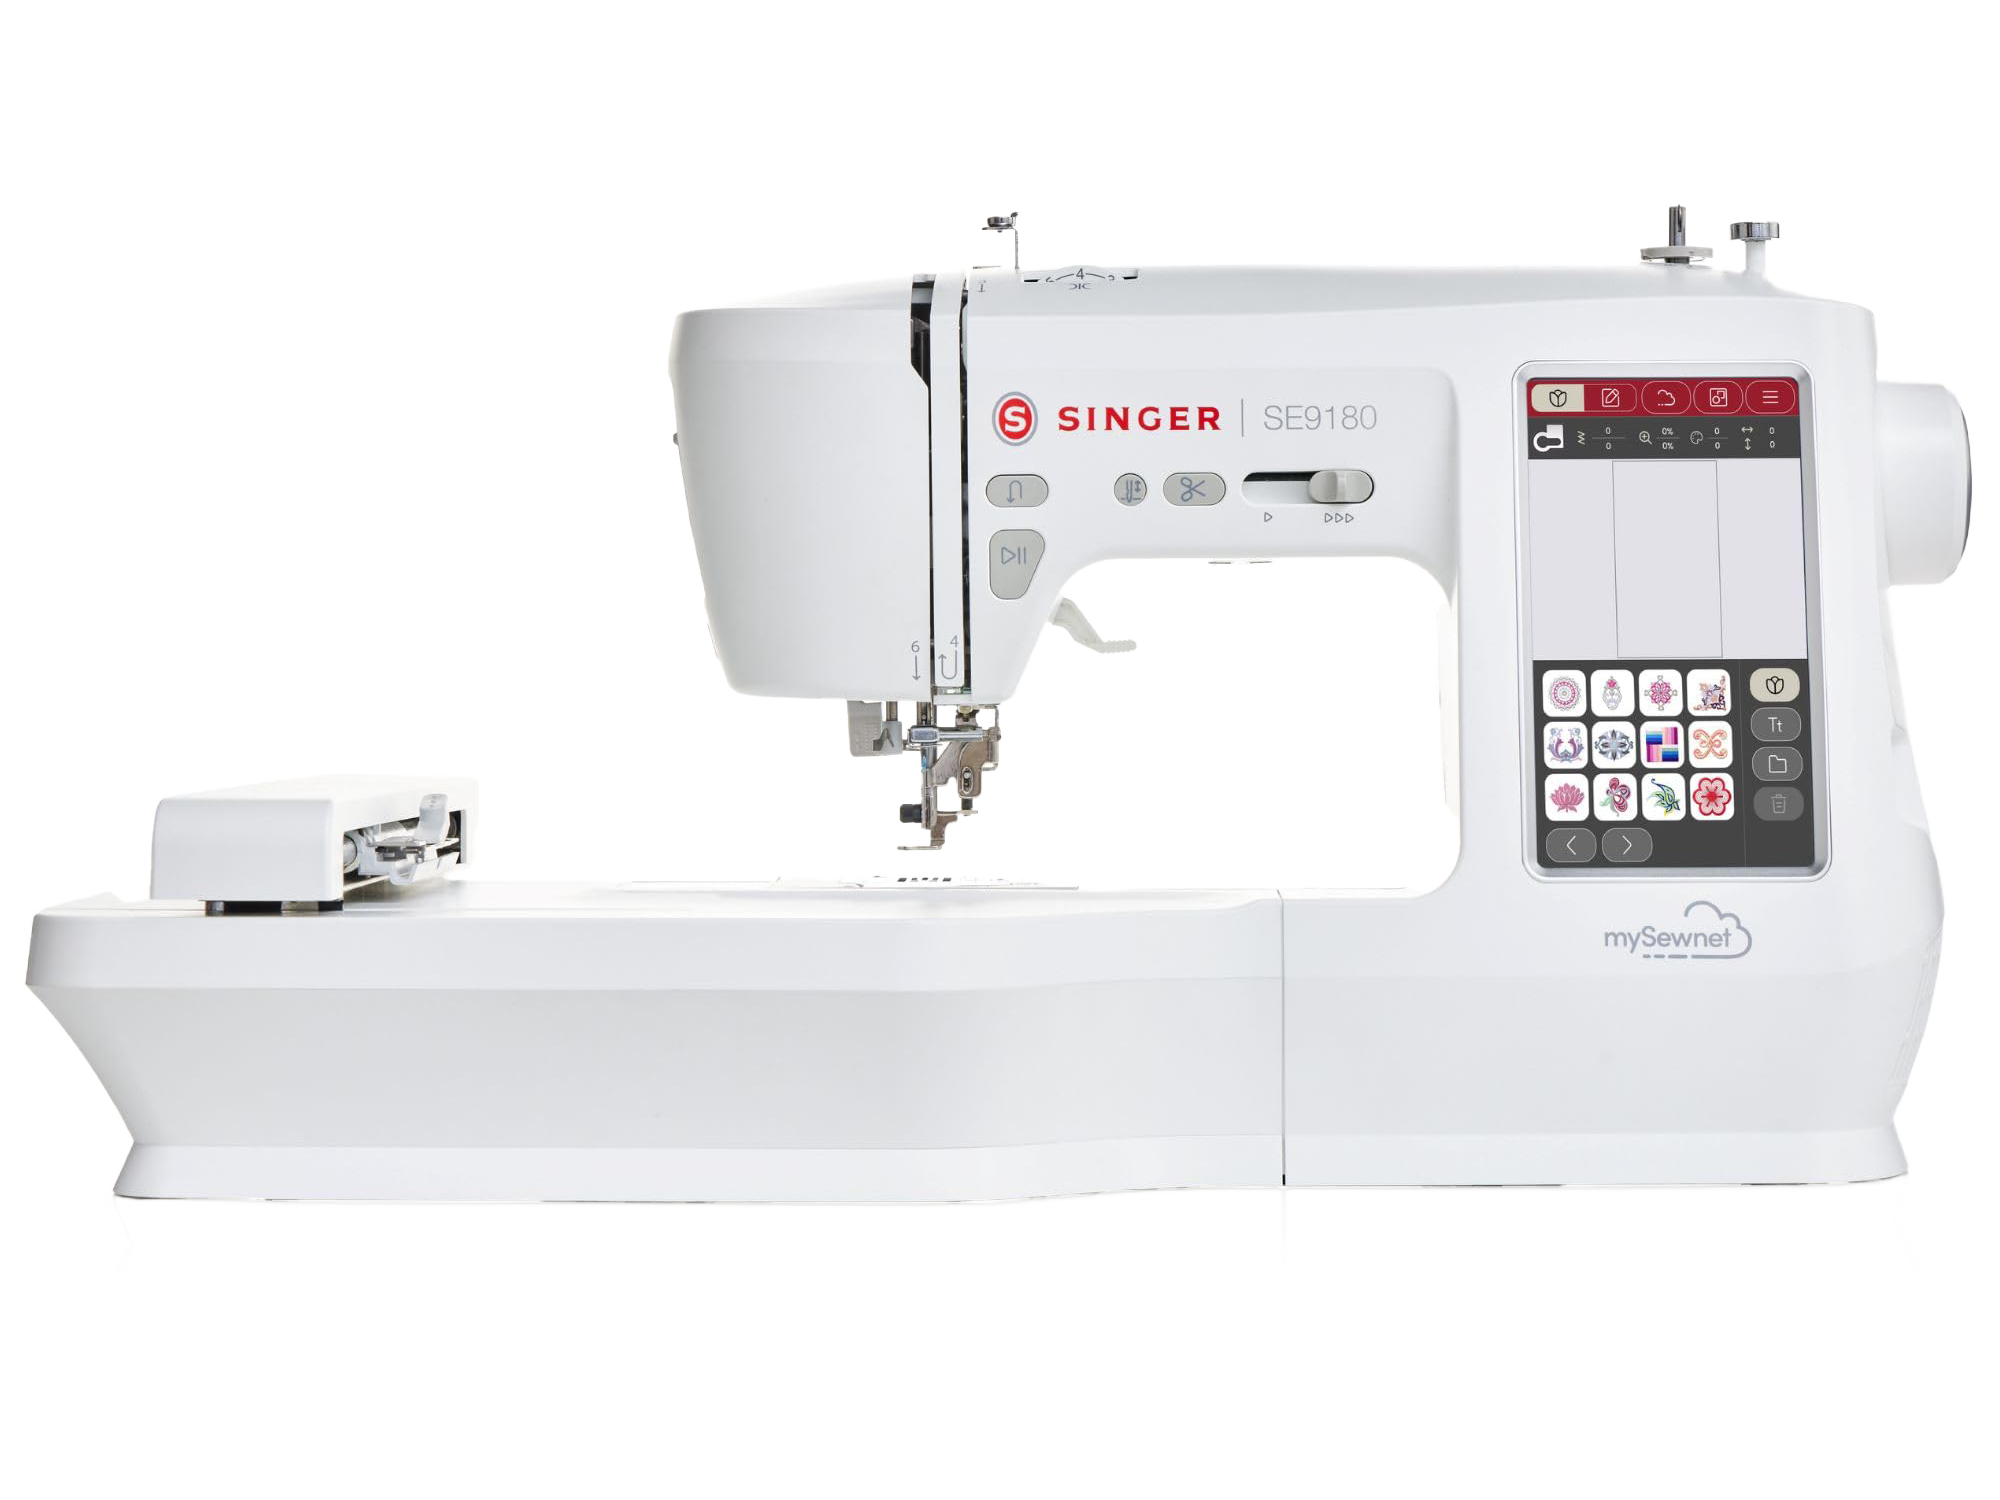 Shop the largest selection of genuine Singer accessories for your new Singer SE9180 Sewing and Embroidery Machine at World Weidner!